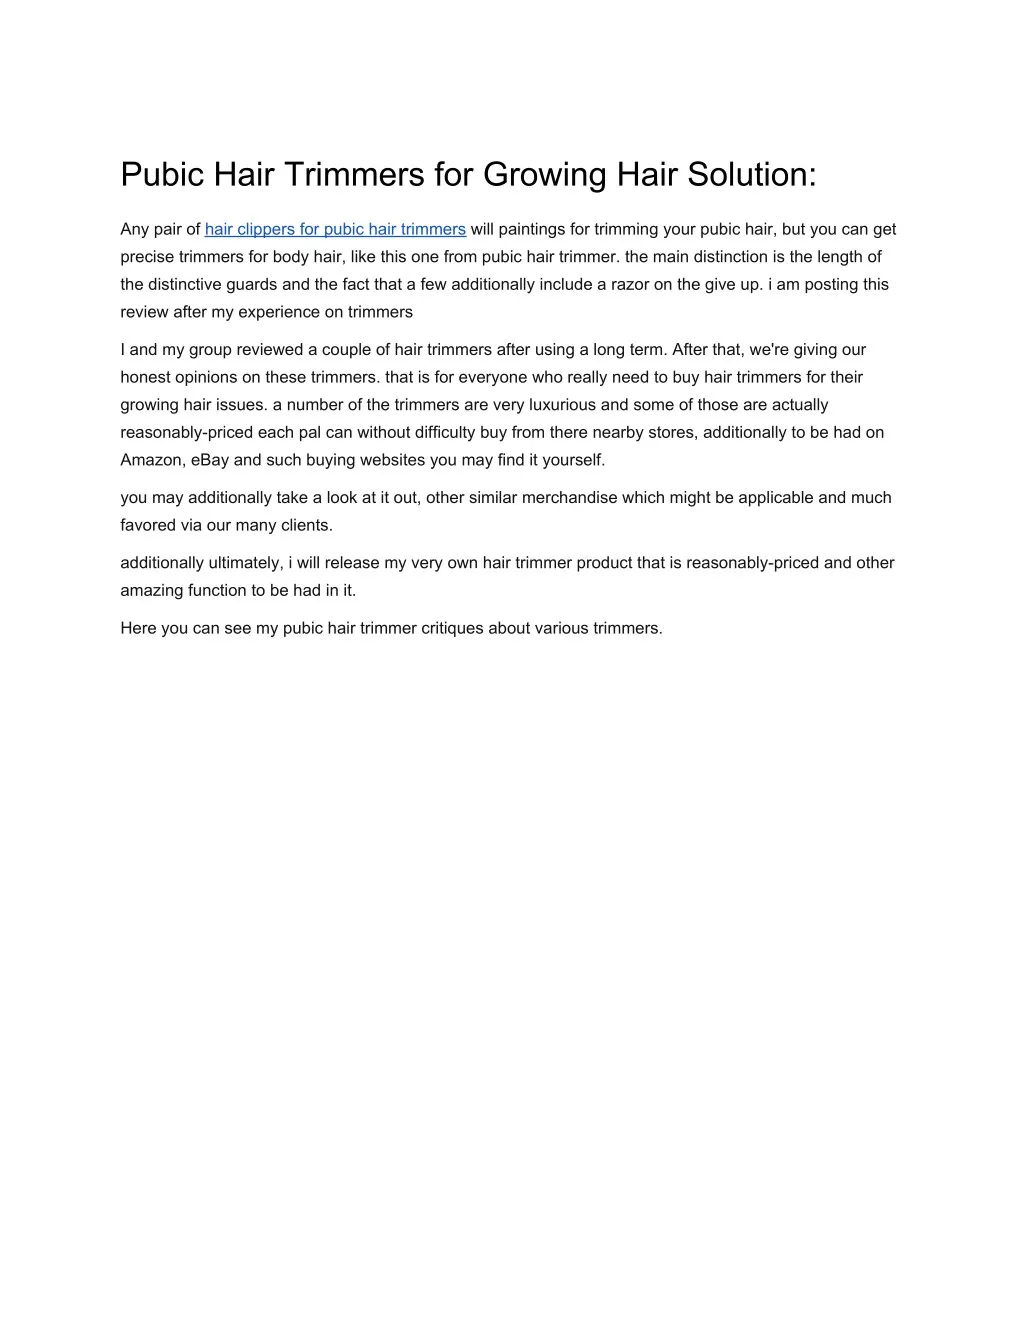 pubic hair trimmers for growing hair solution